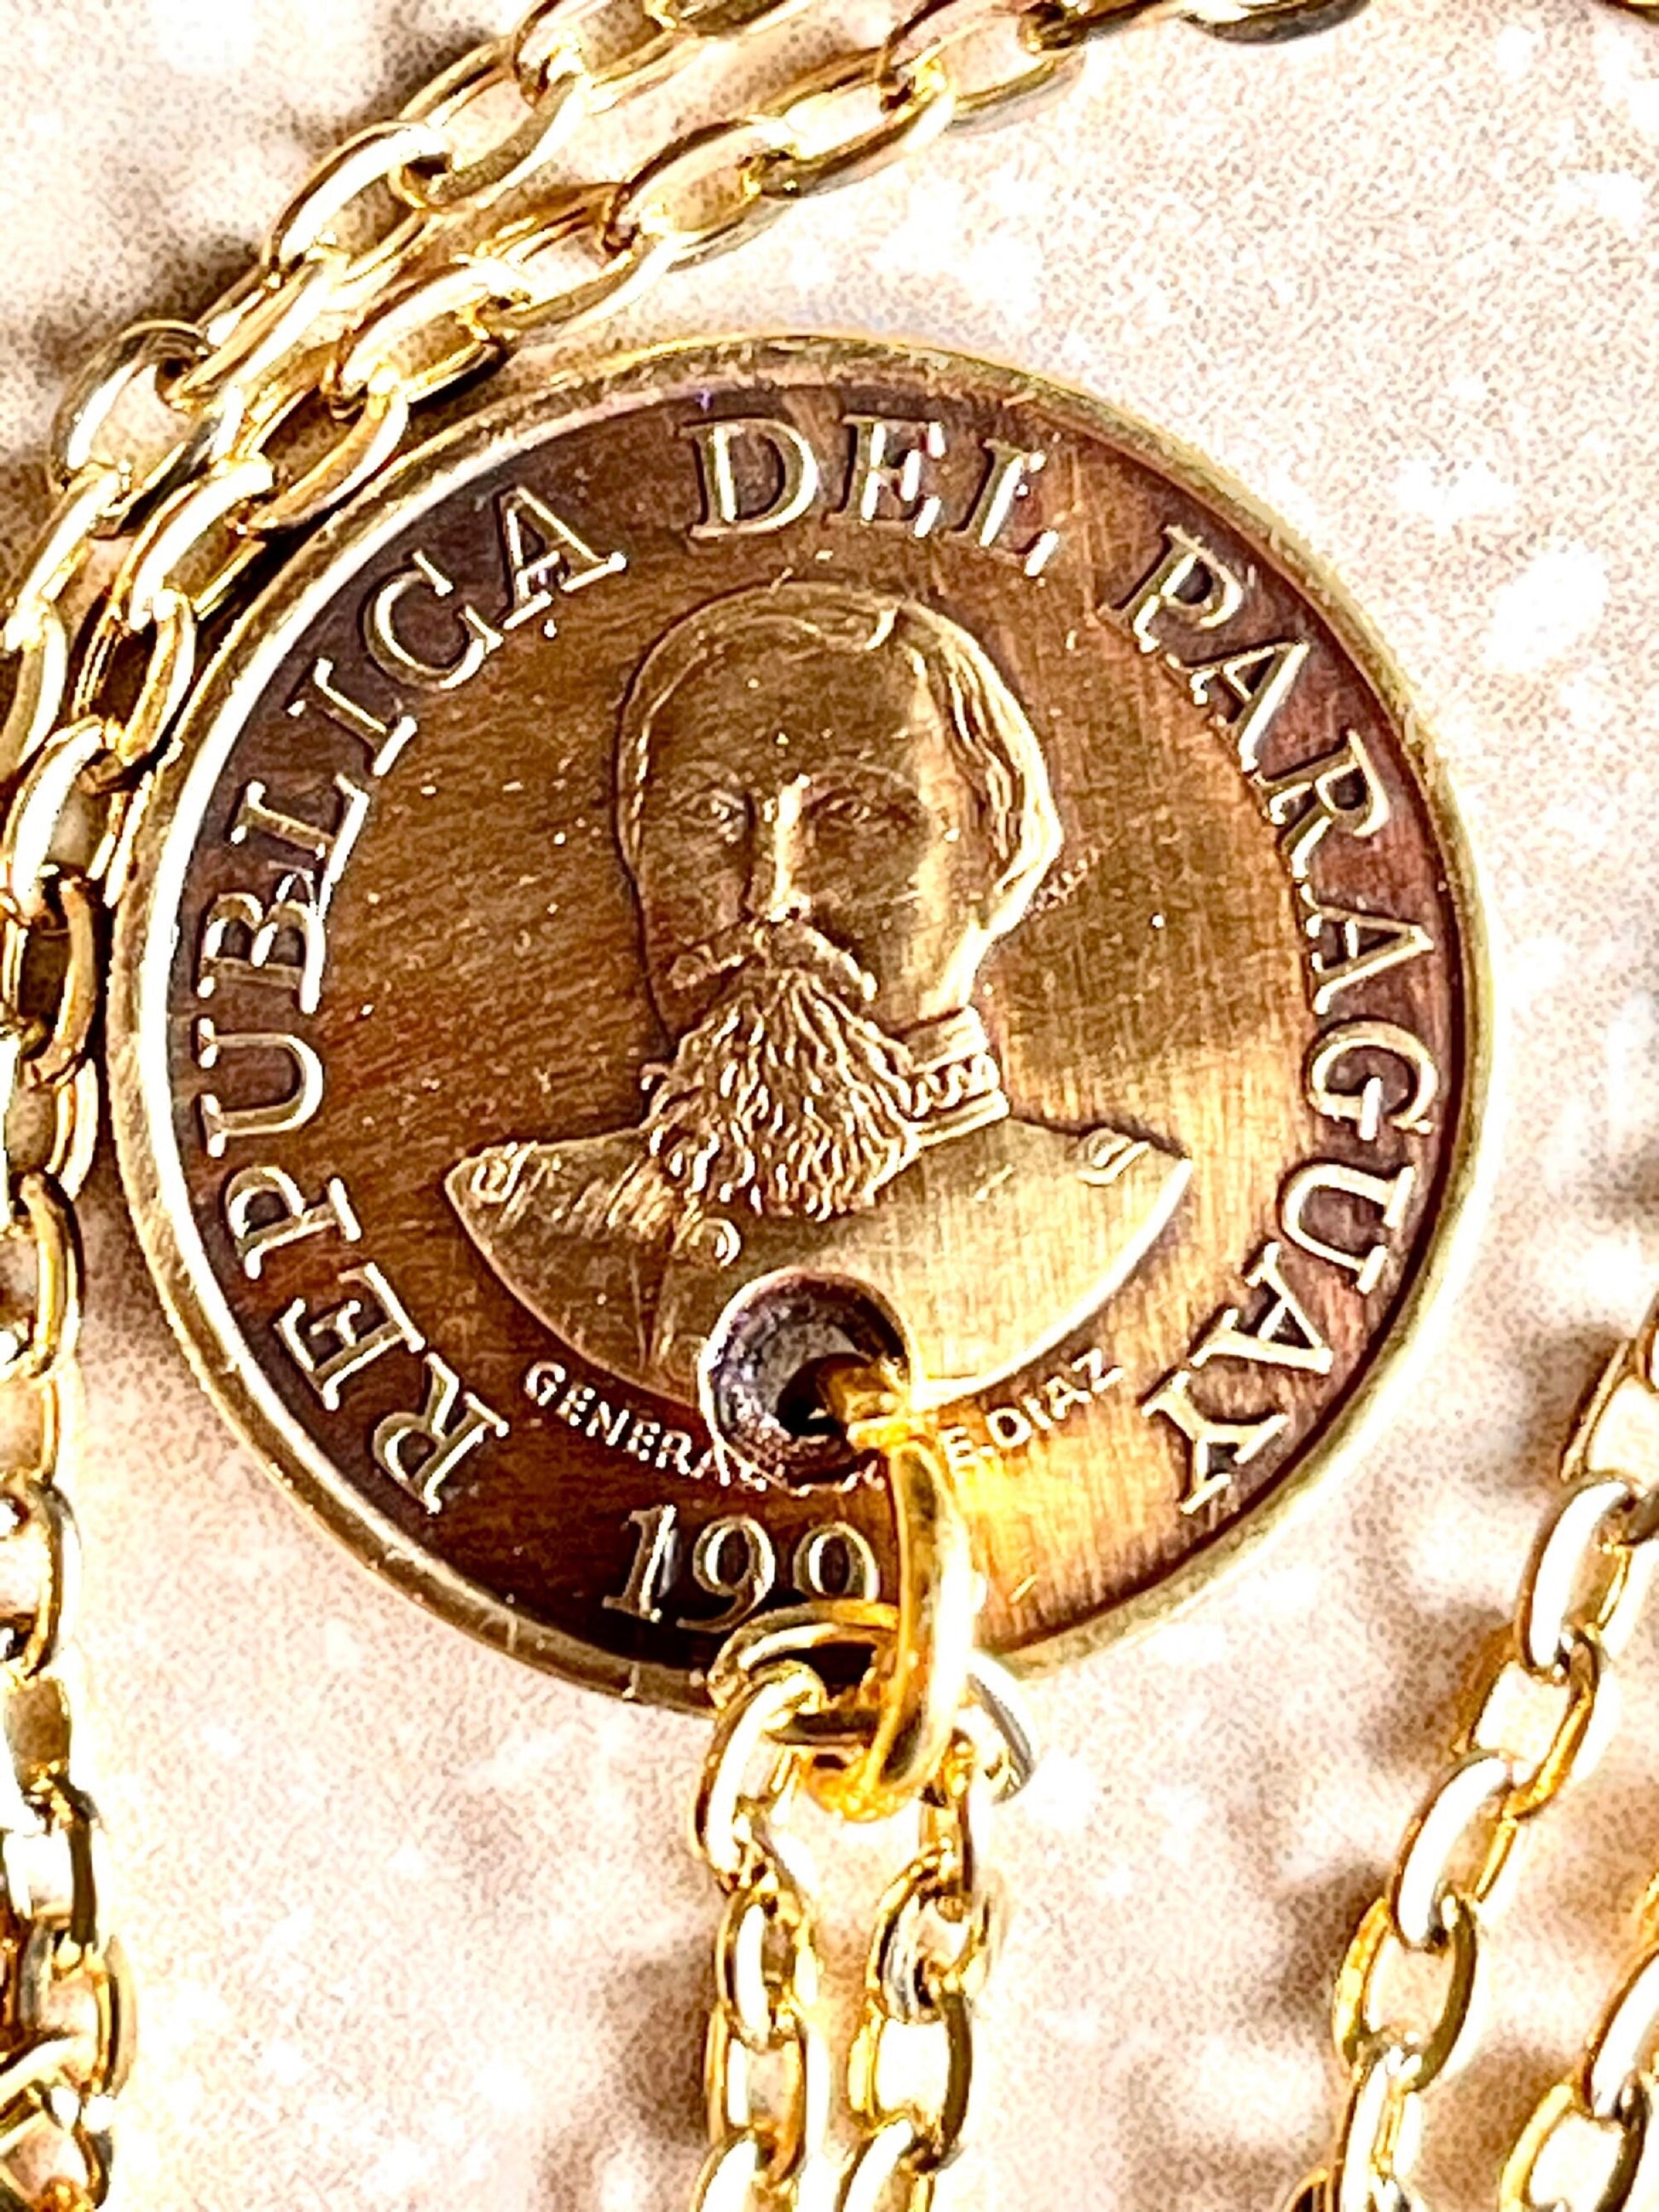 Paraguay Coin Necklace Pendant 100 Pesos Personal Handmade Jewelry Gift Friend Charm For Him Her World Coin Collector